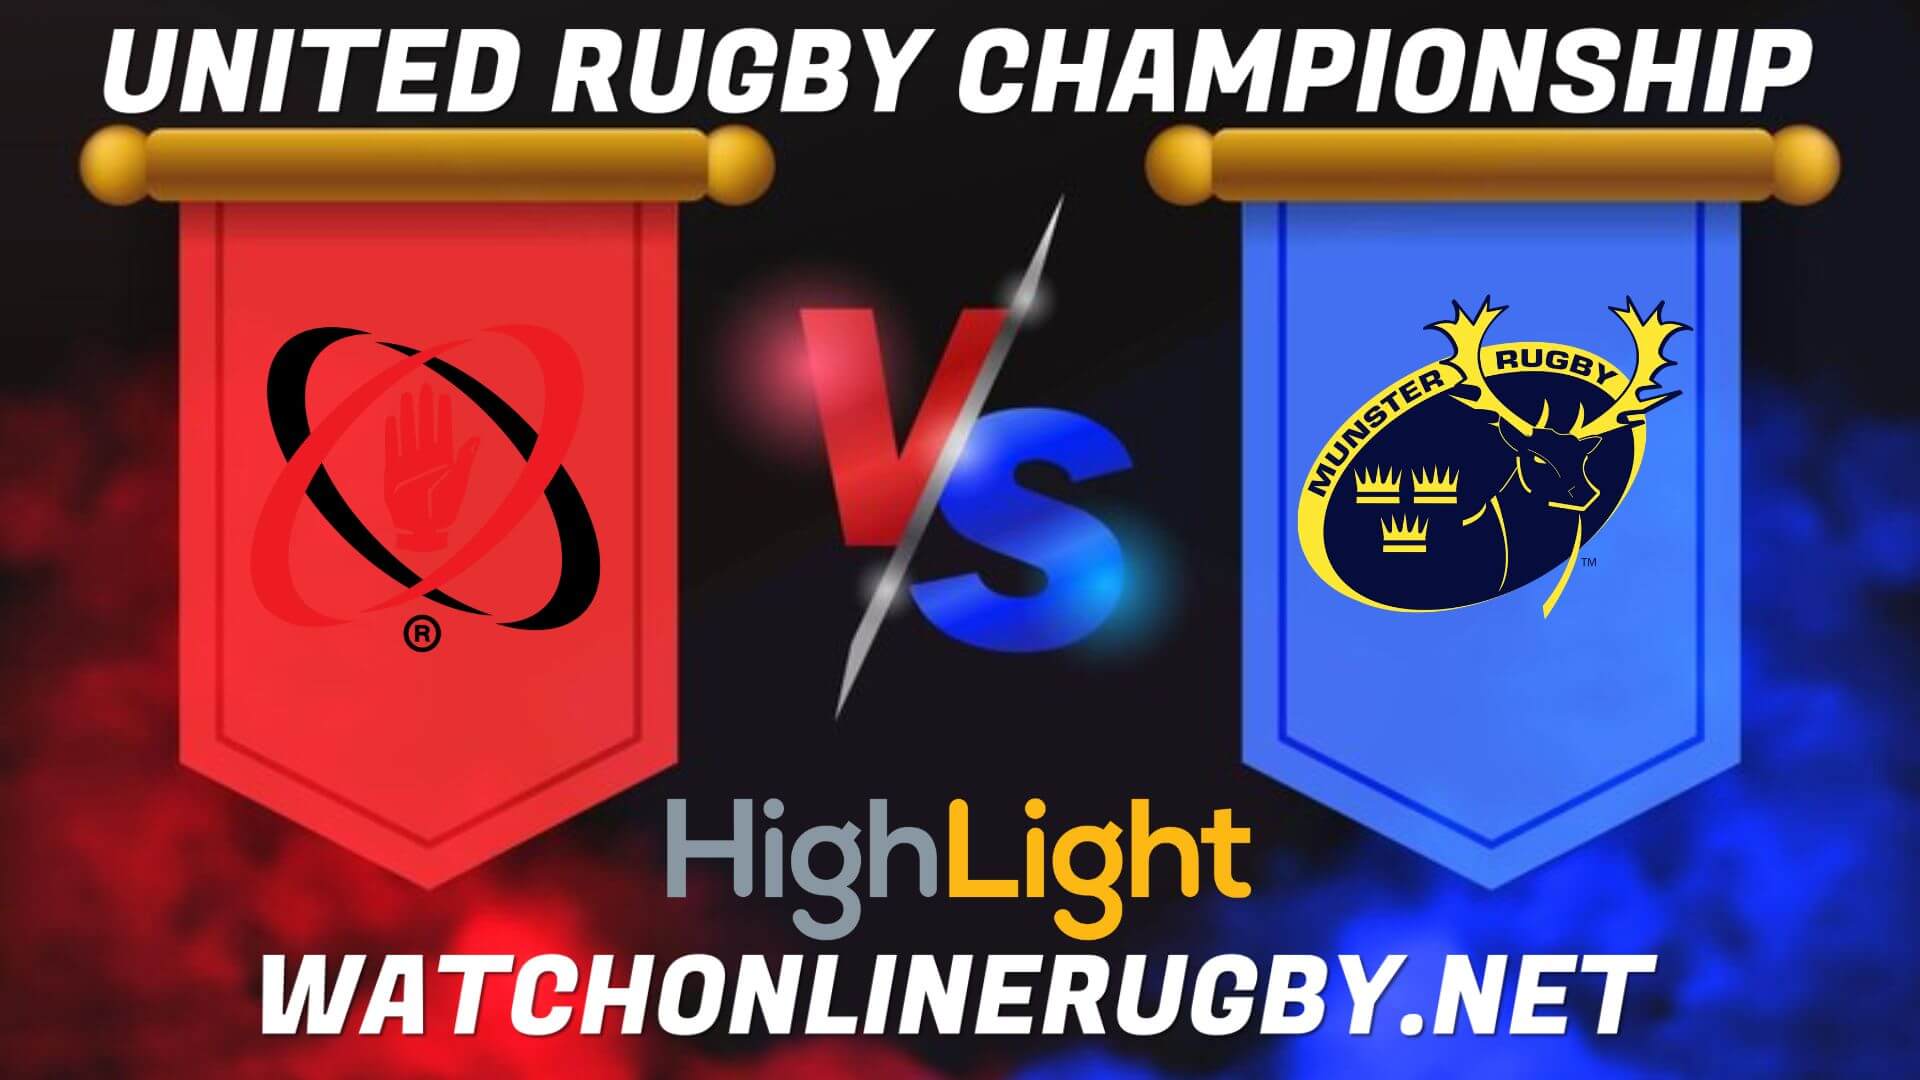 Ulster Vs Munster United Rugby Championship 2022 RD 16